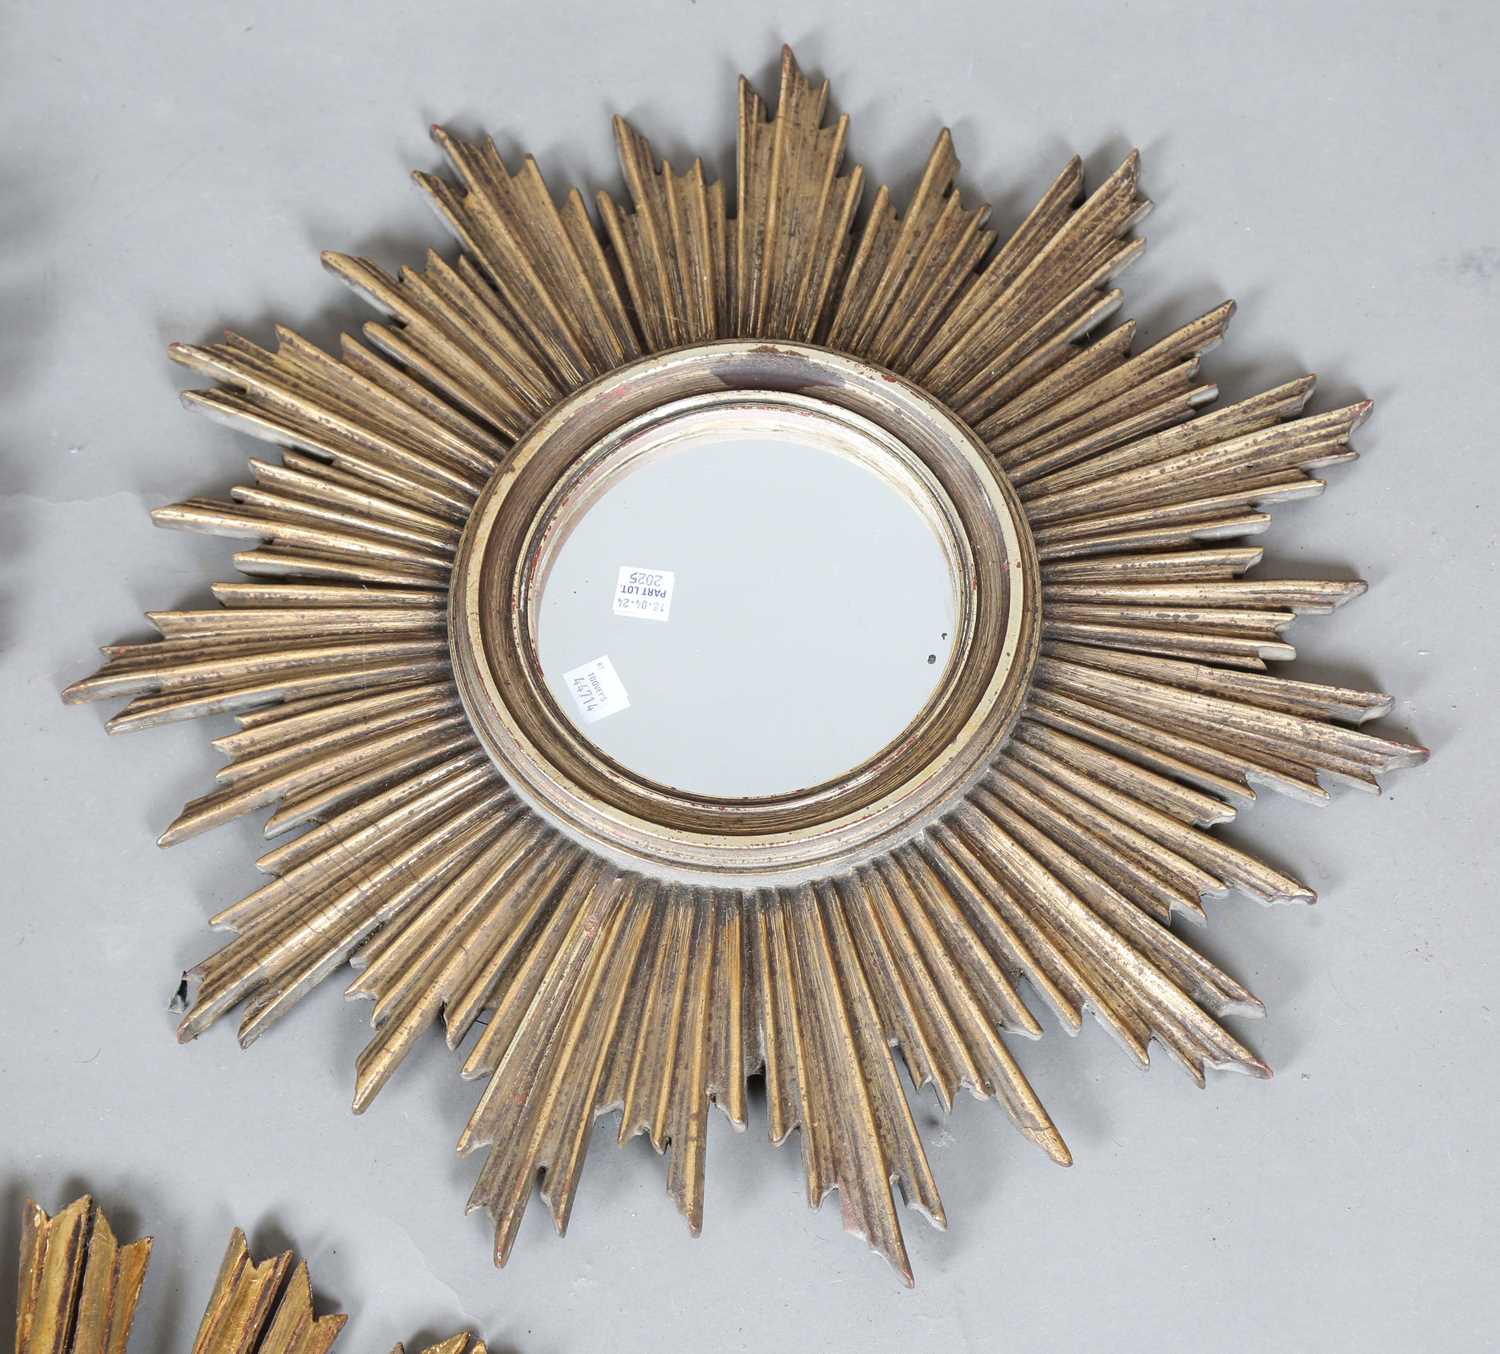 A 20th century Continental giltwood circular wall mirror with sunburst frame, diameter 61cm, - Image 9 of 10